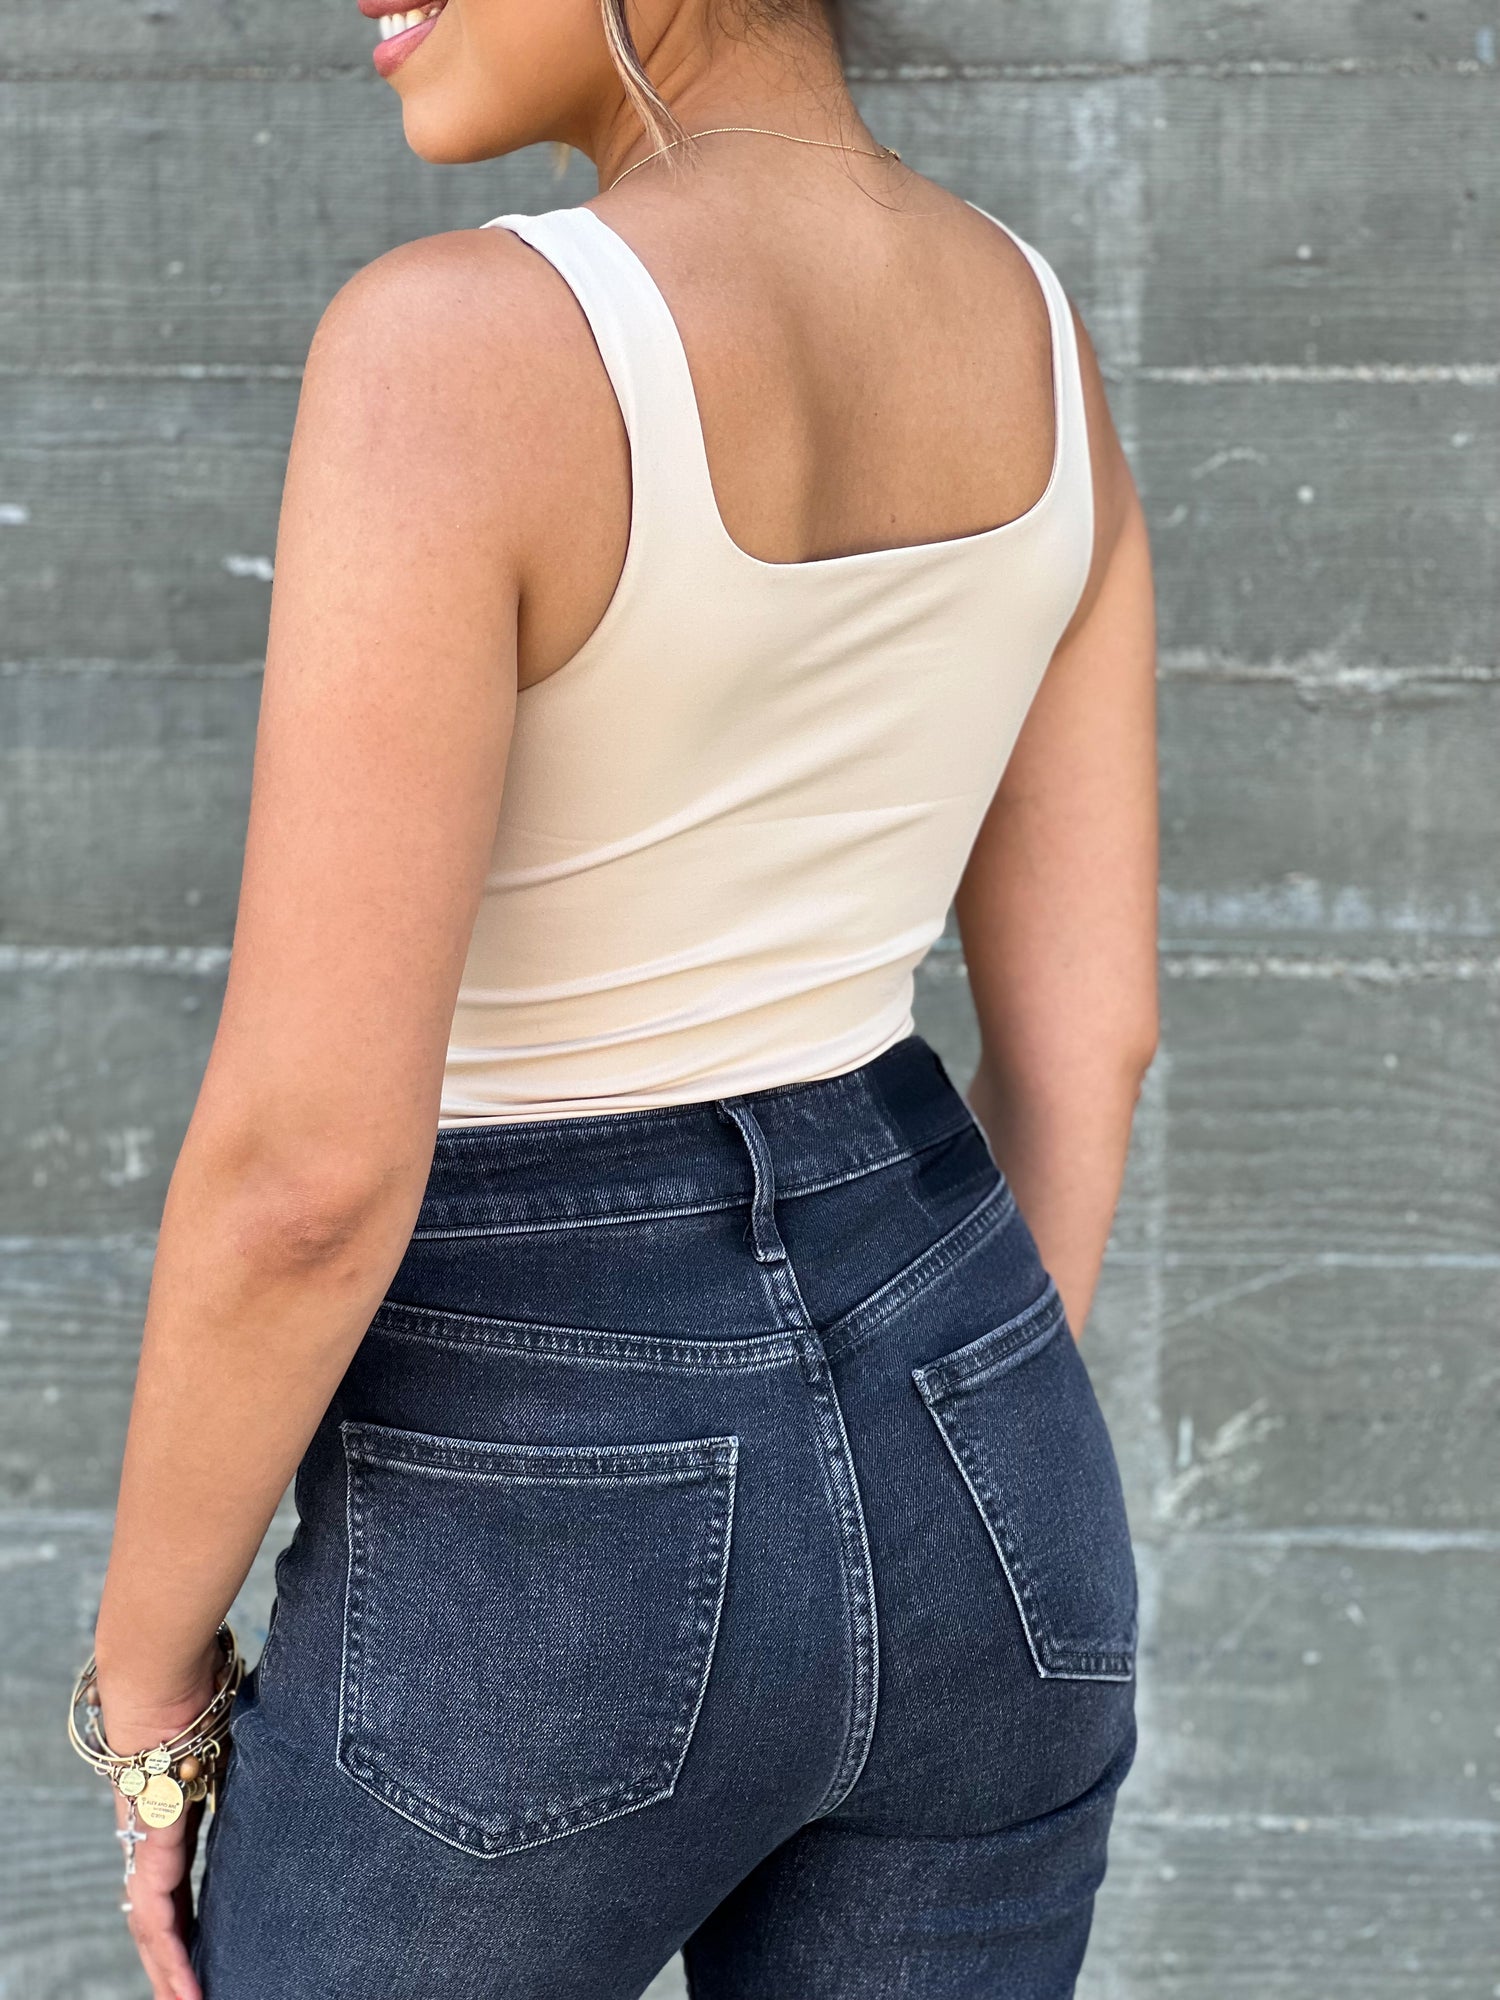 This is a closeup shot of the nude bodysuit. She is facing her back to the camera. The model is tan skinned and pairing the top with black jeans. 